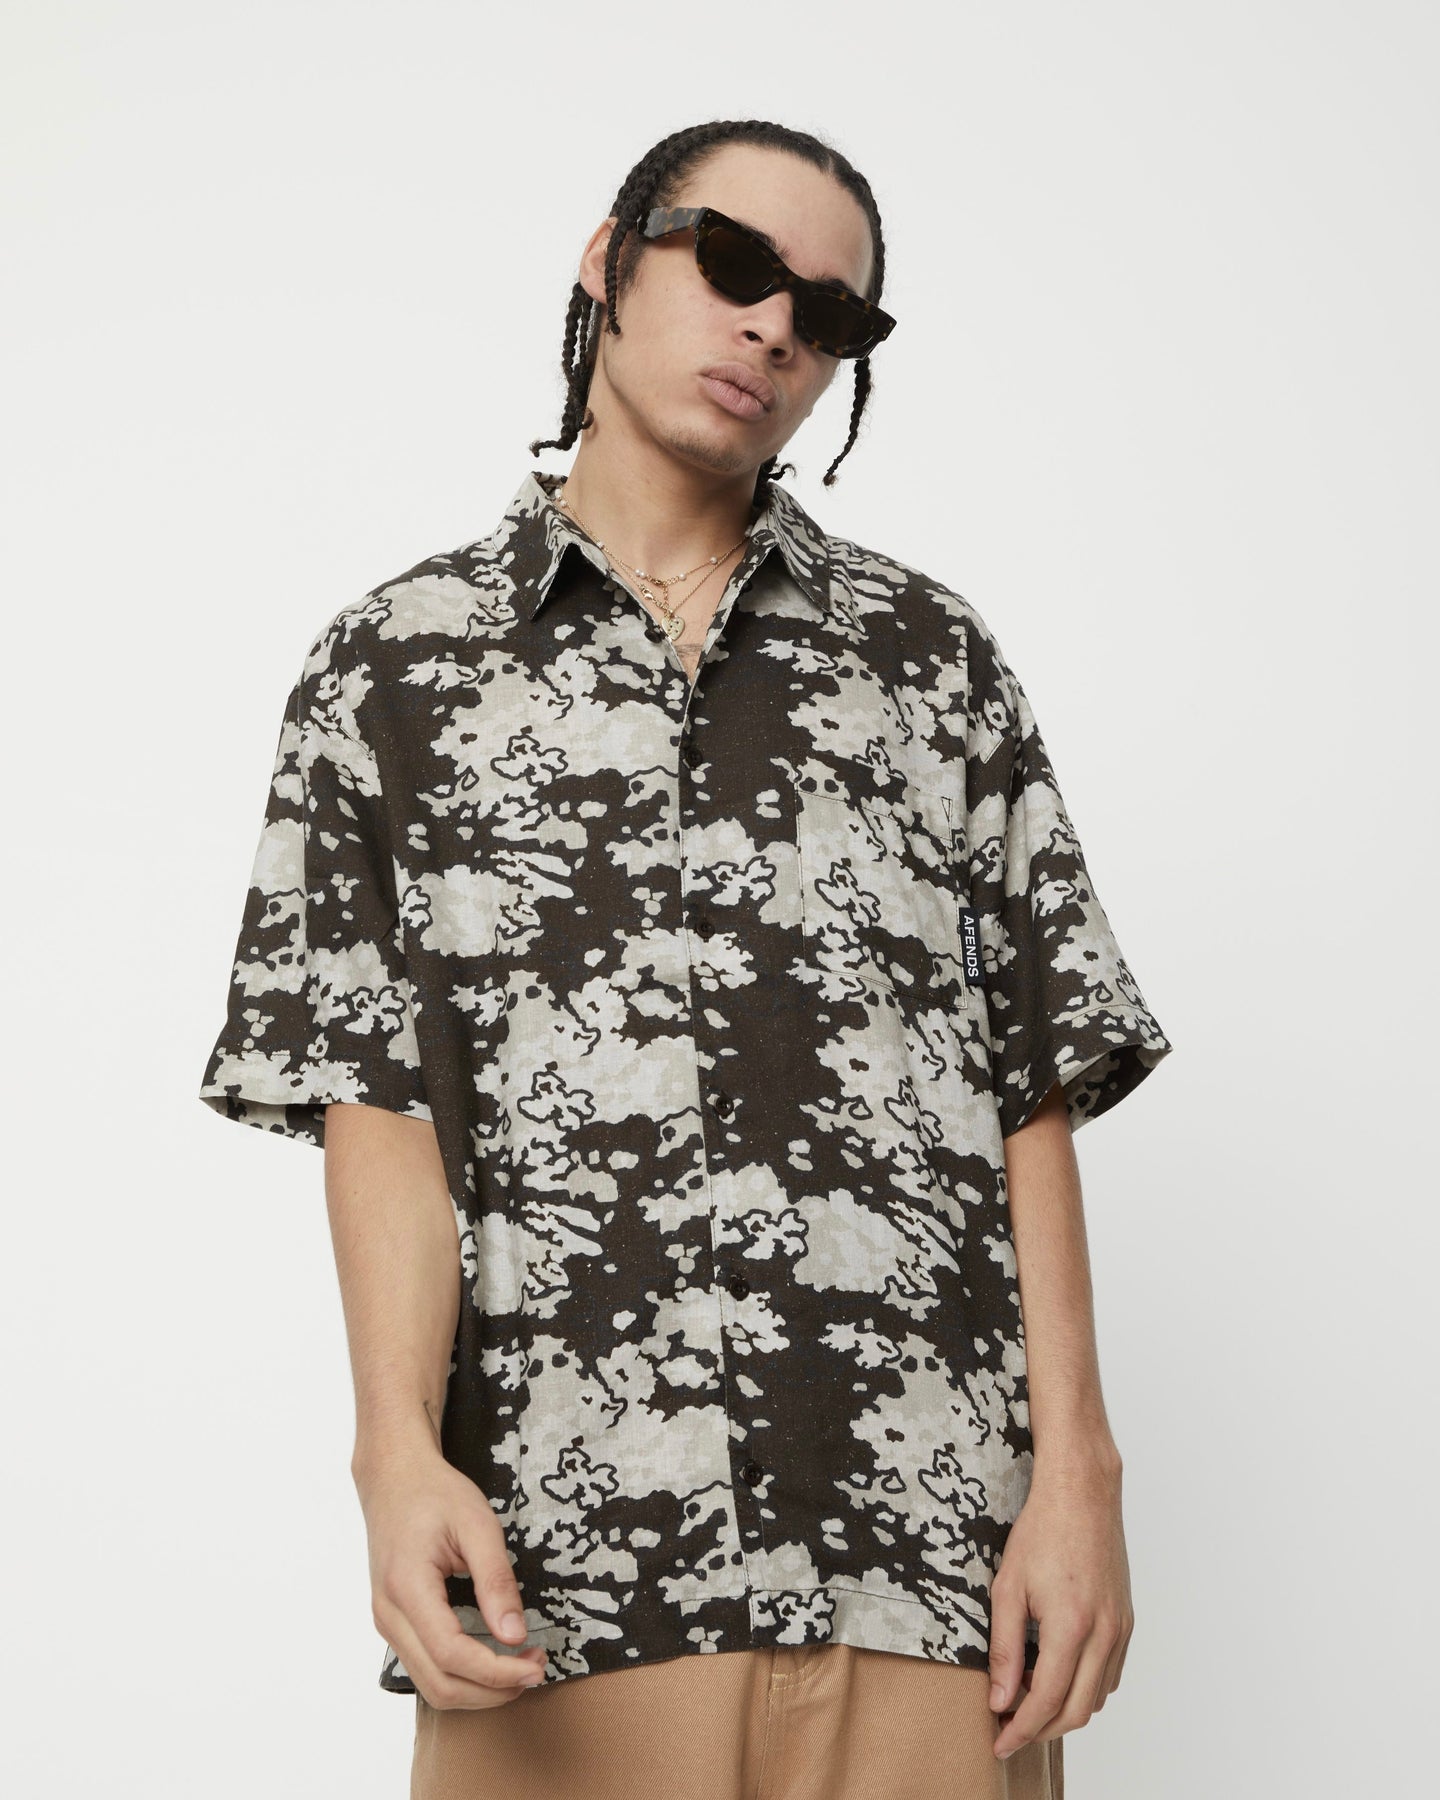 the Afends Men's Short Sleeve Jungle Shirt in Earth Camo on a model posing with his head tilted to one side